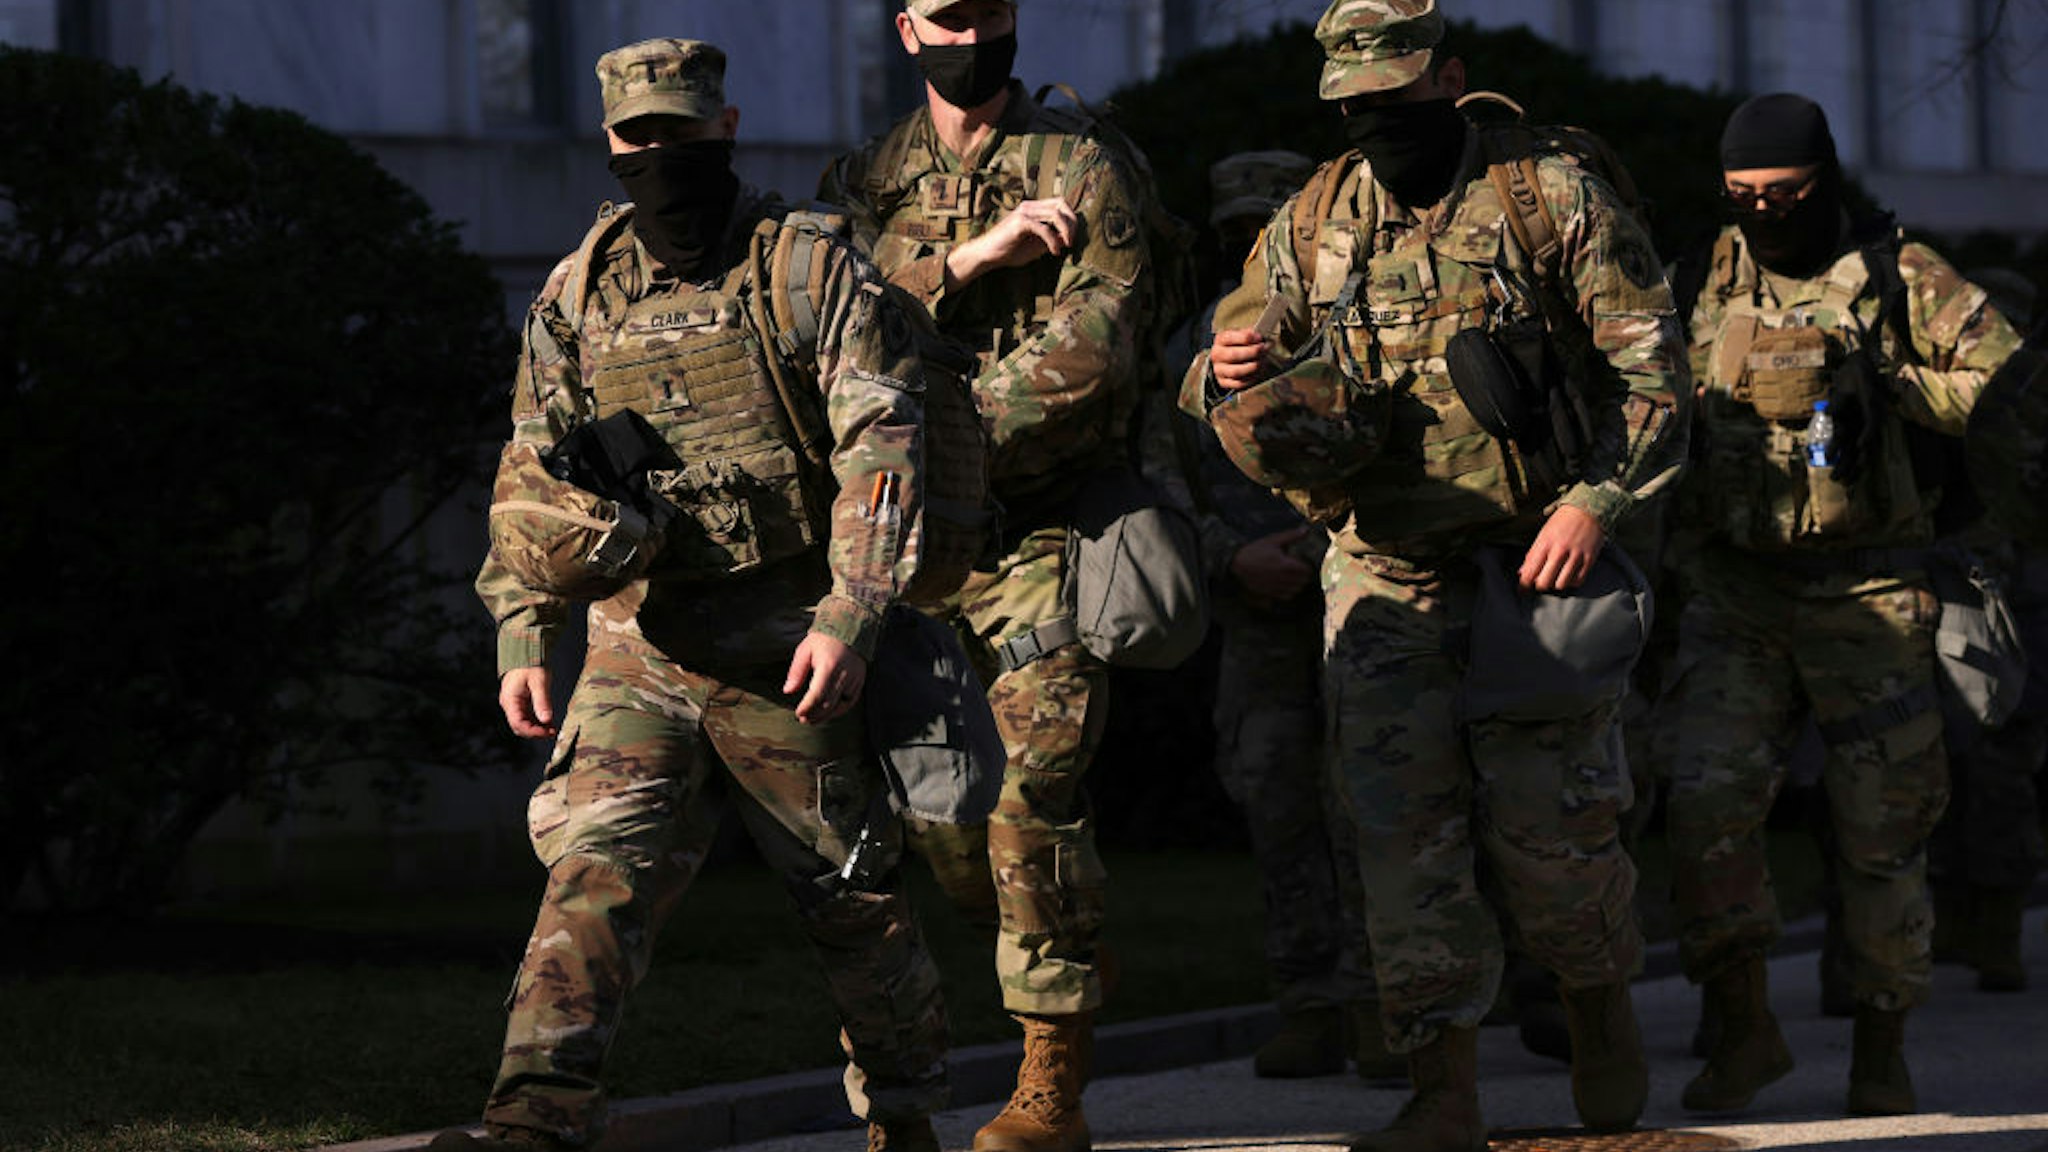 WASHINGTON, DC - MARCH 04: Members of the National Guard pass by Rayburn House Office Building on March 4, 2021 on Capitol Hill in Washington, DC. Security has been tightened up as intelligence obtained by U.S. Capitol Police showed a possible plot to breach the Capitol by an identified militia group on today, the date that QAnon followers believe that former U.S. President Donald Trump will return to power.